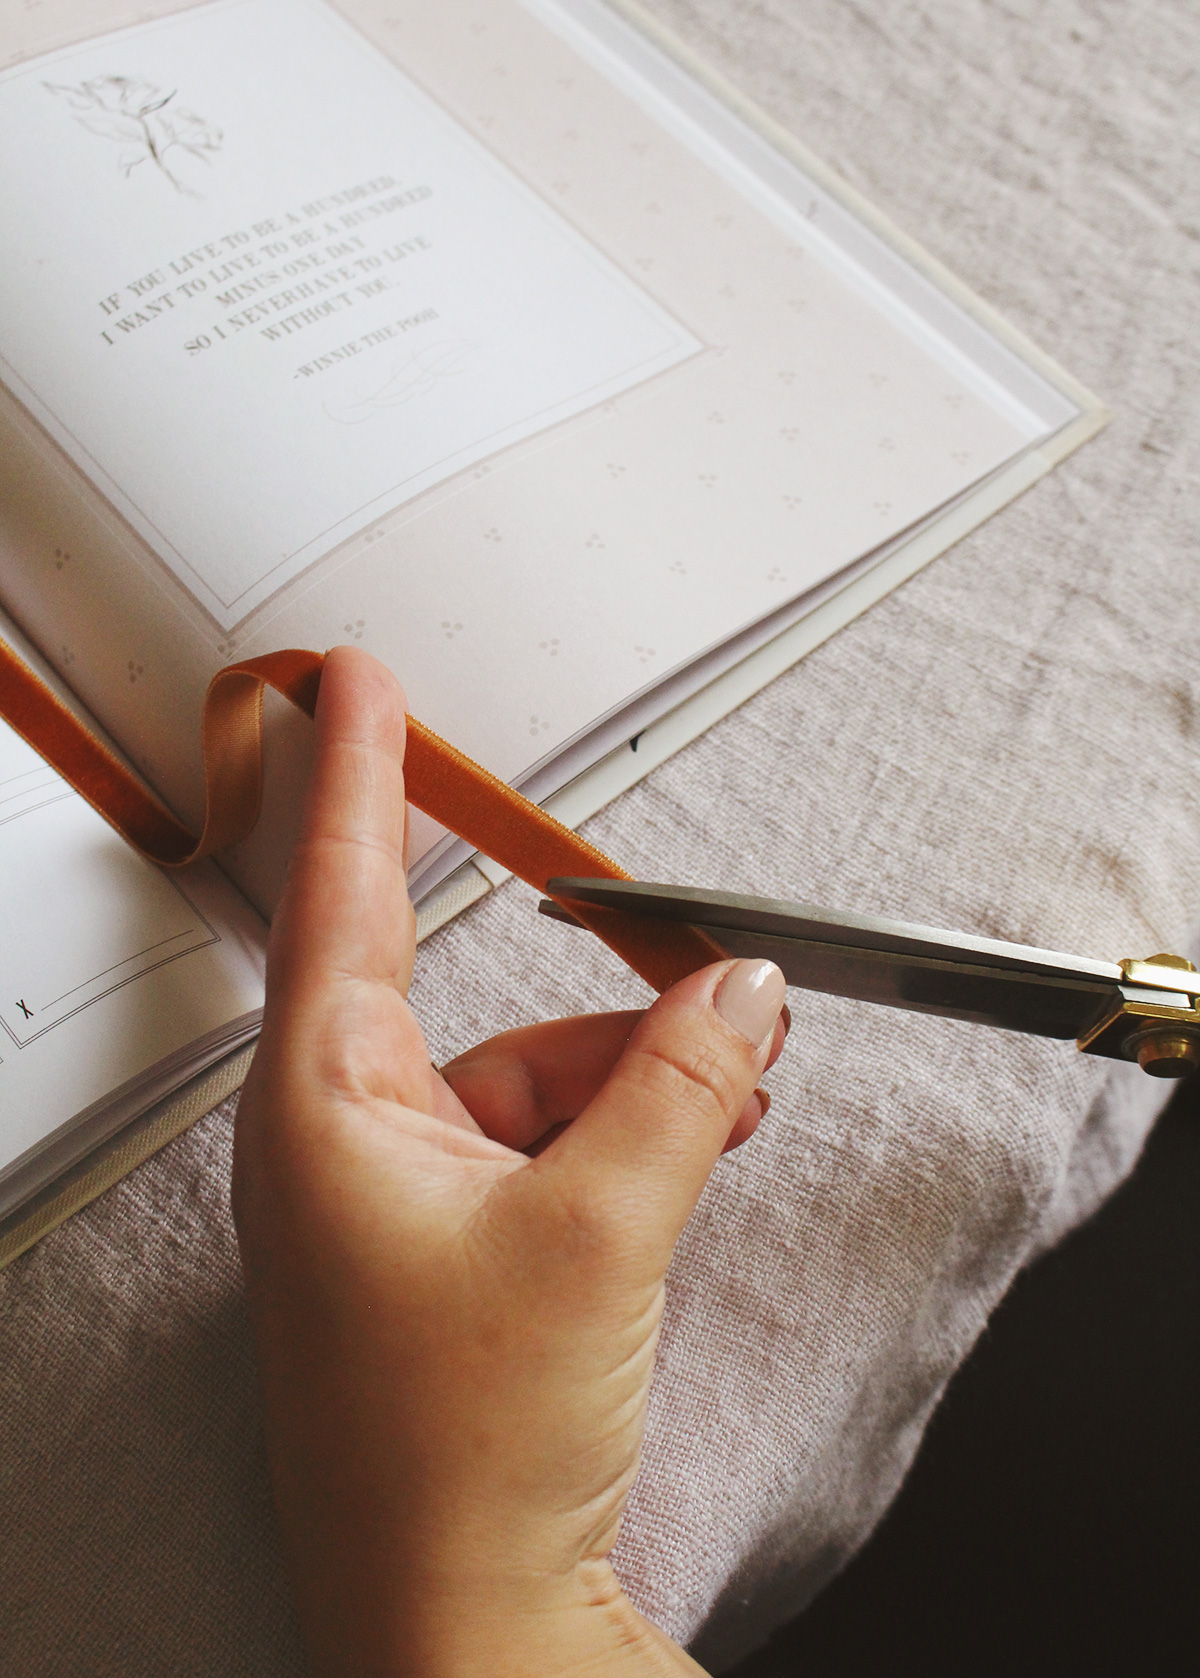 How To Use The Bookmark in Your L&V Wedding Guestbook